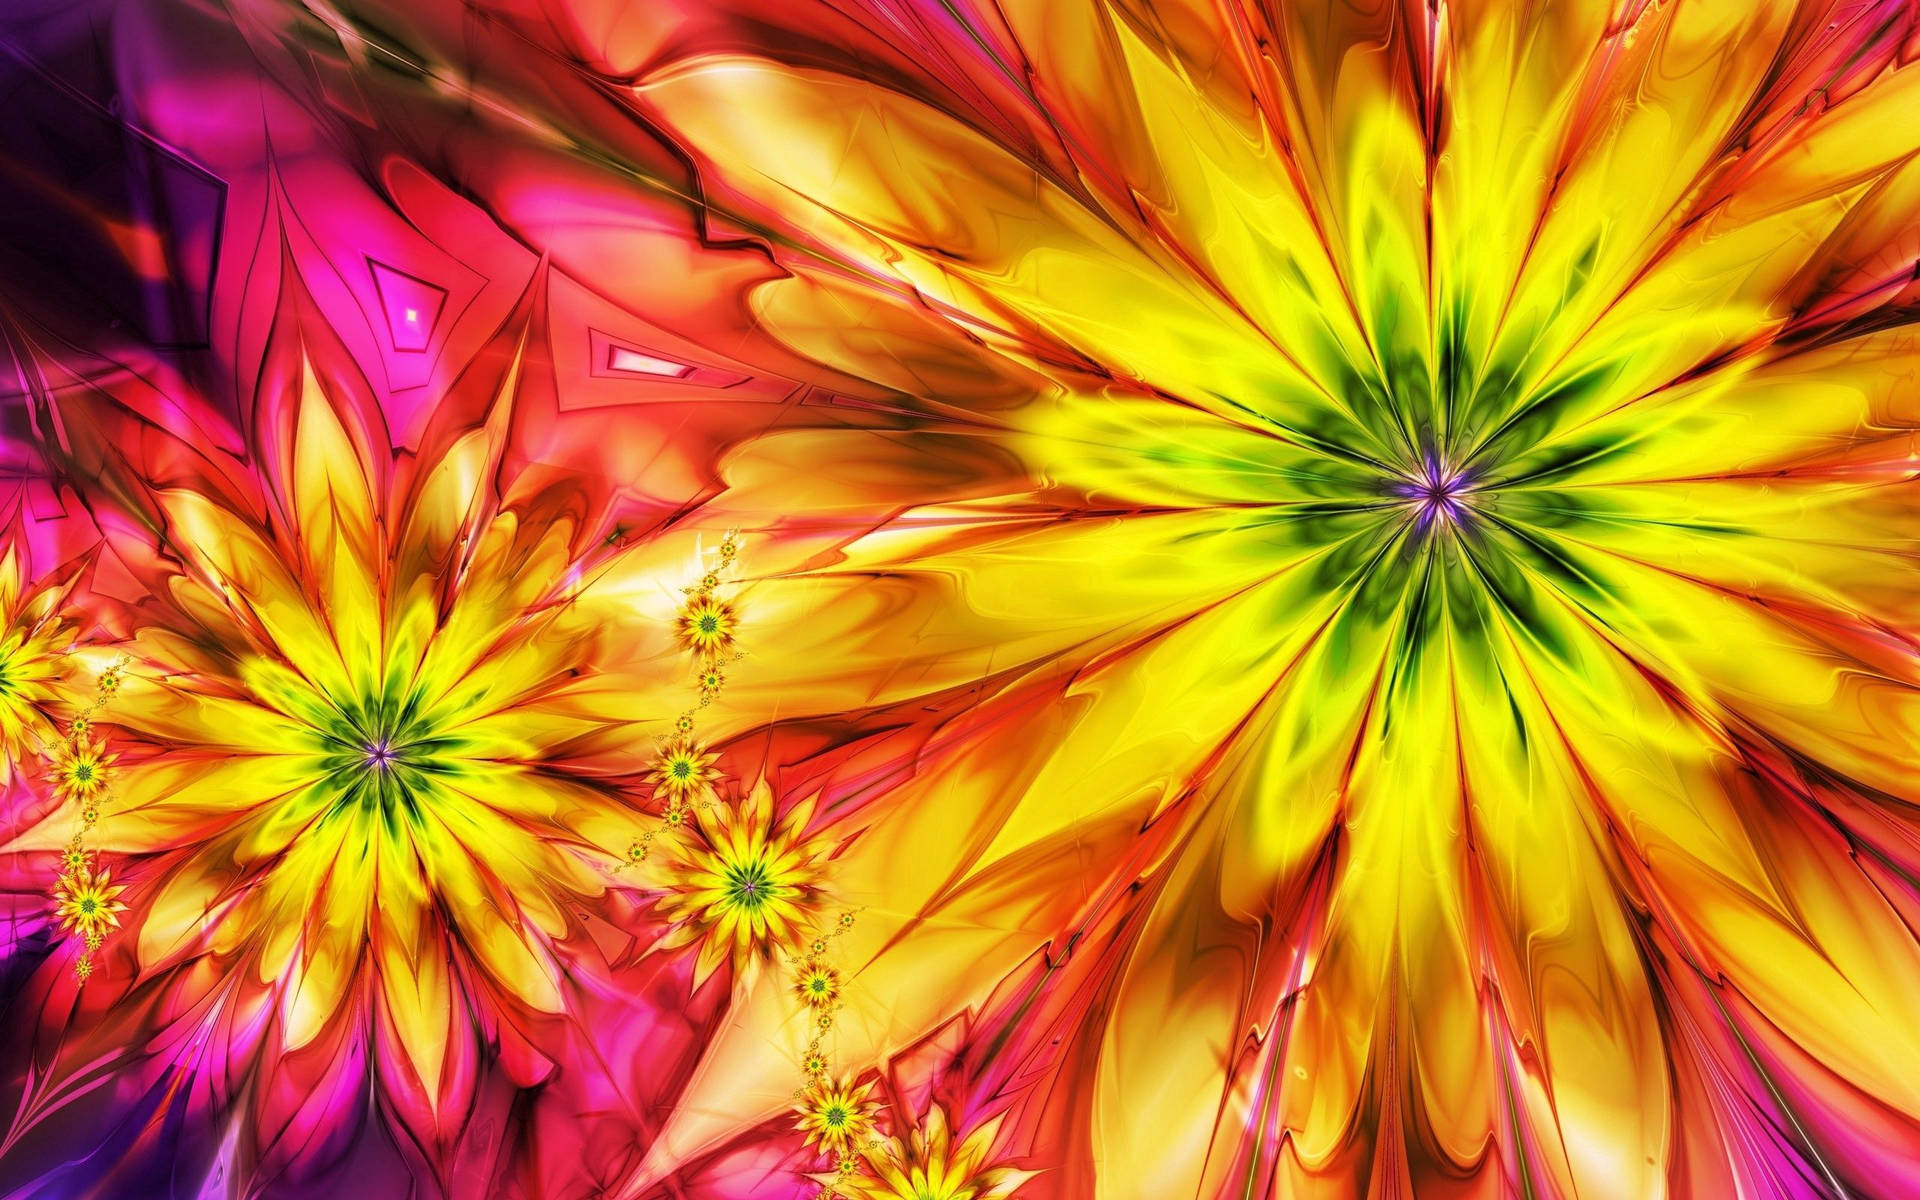 Abstract Colorful Floral Design Wallpaper